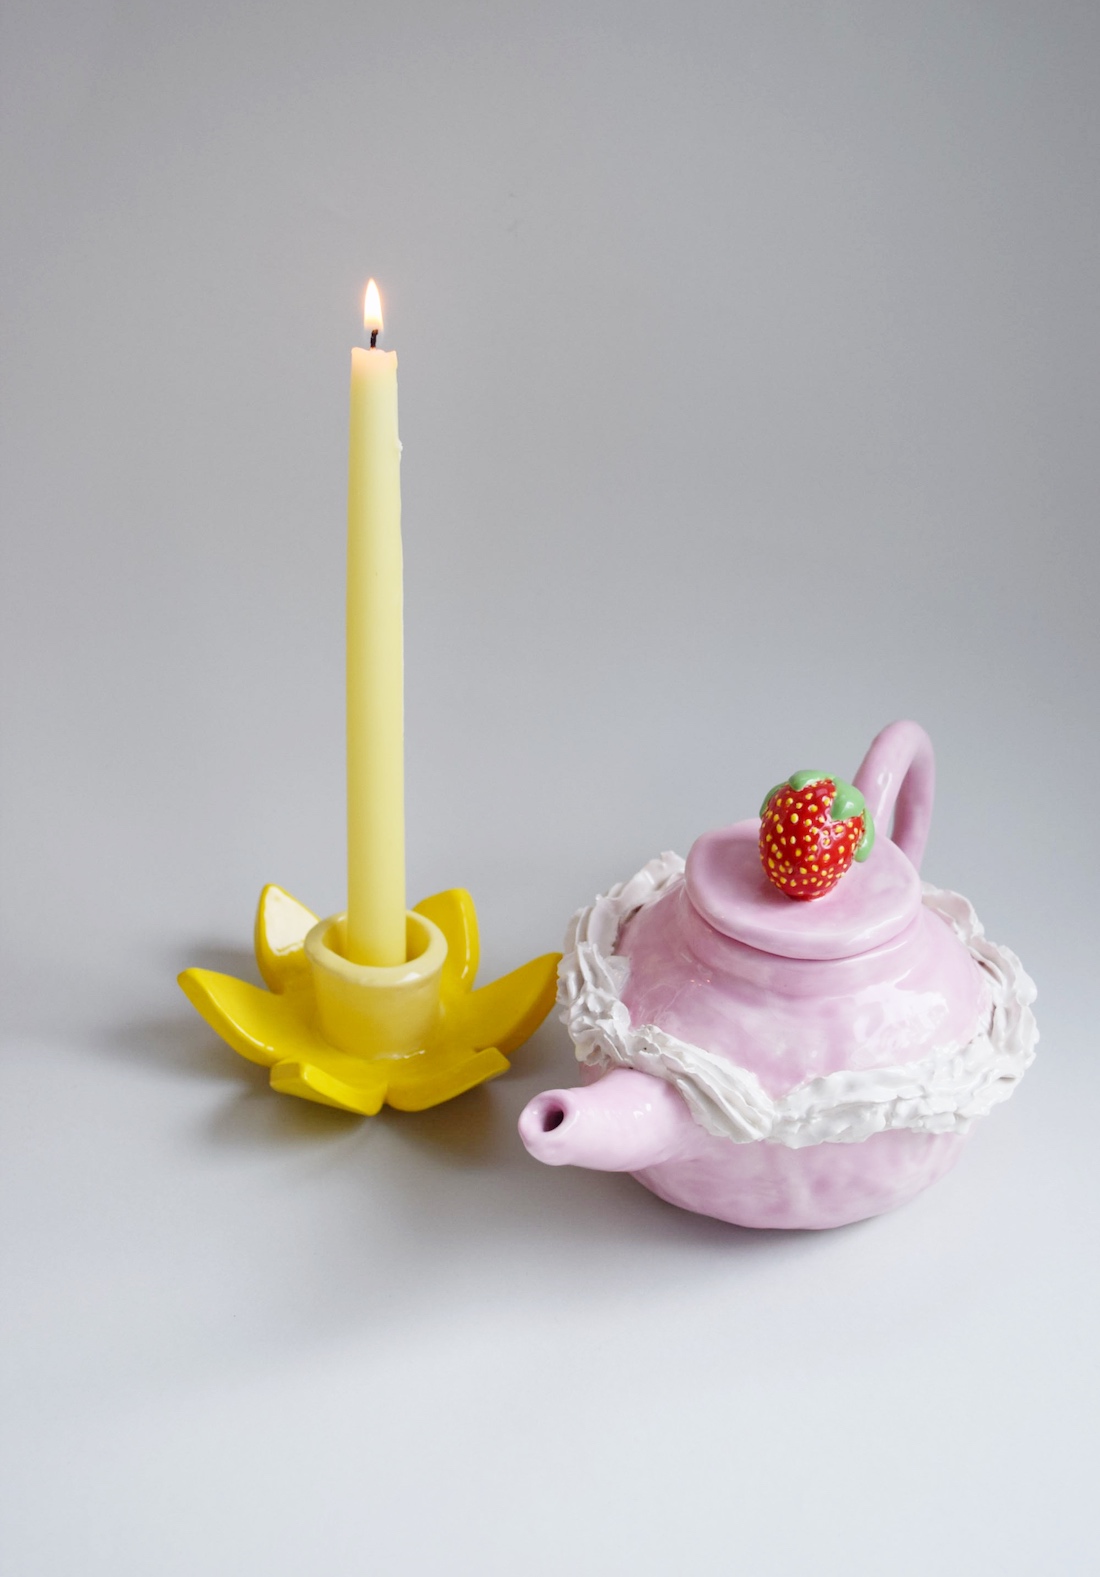 Daffodil candle holder and strawberries and cream tea pot from Kiwi Poca